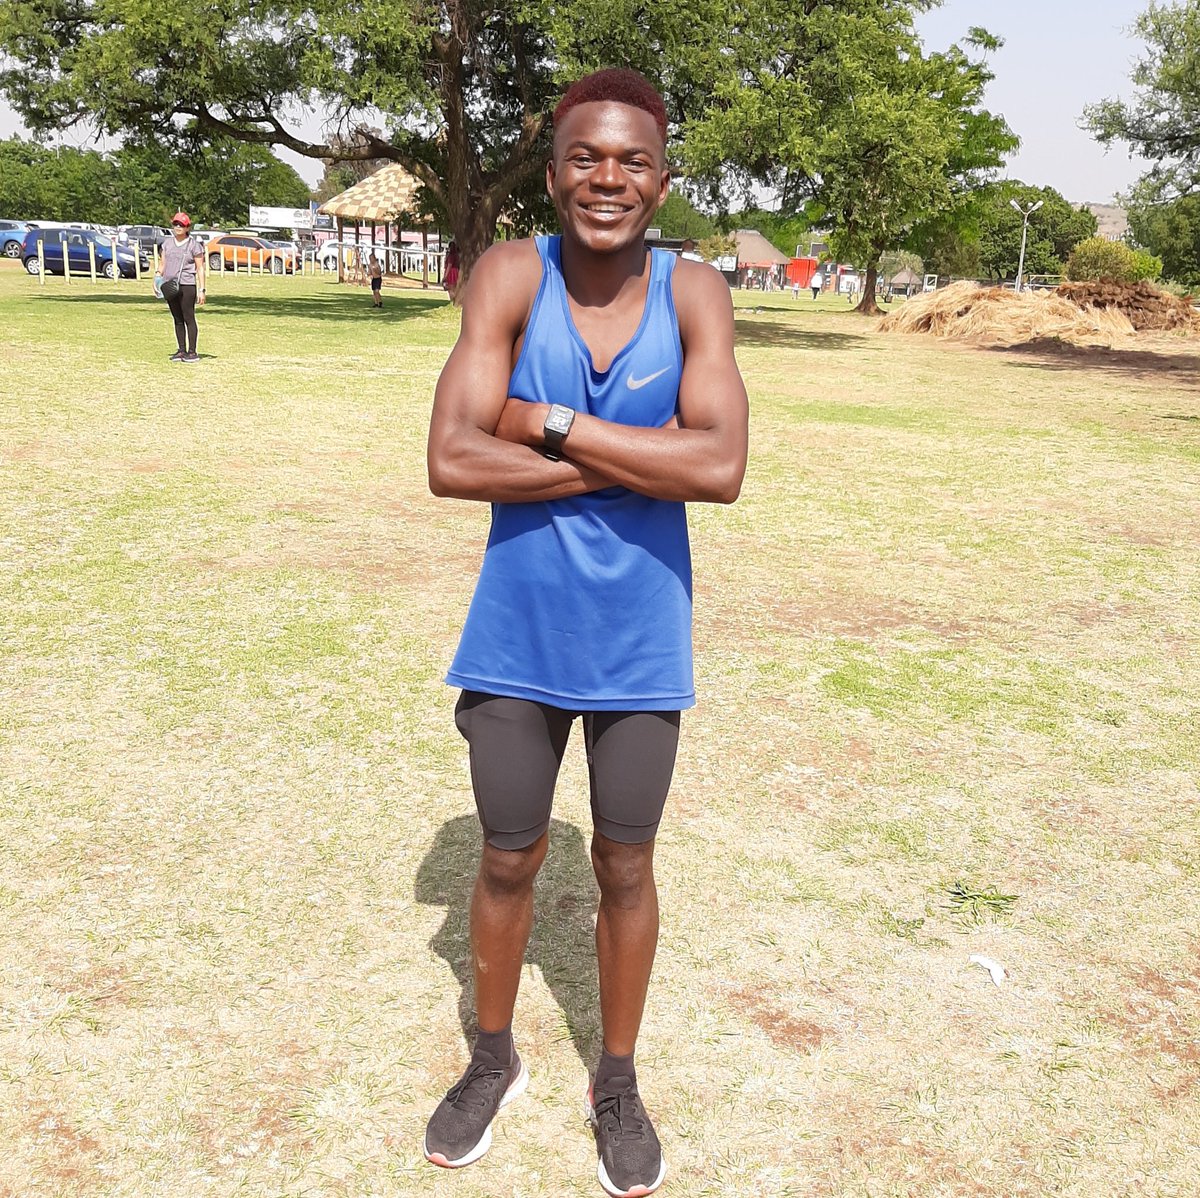 Well done to Malibongwe Ndlovu for setting a new course record 15:39 at Rietvlei parkrun today!